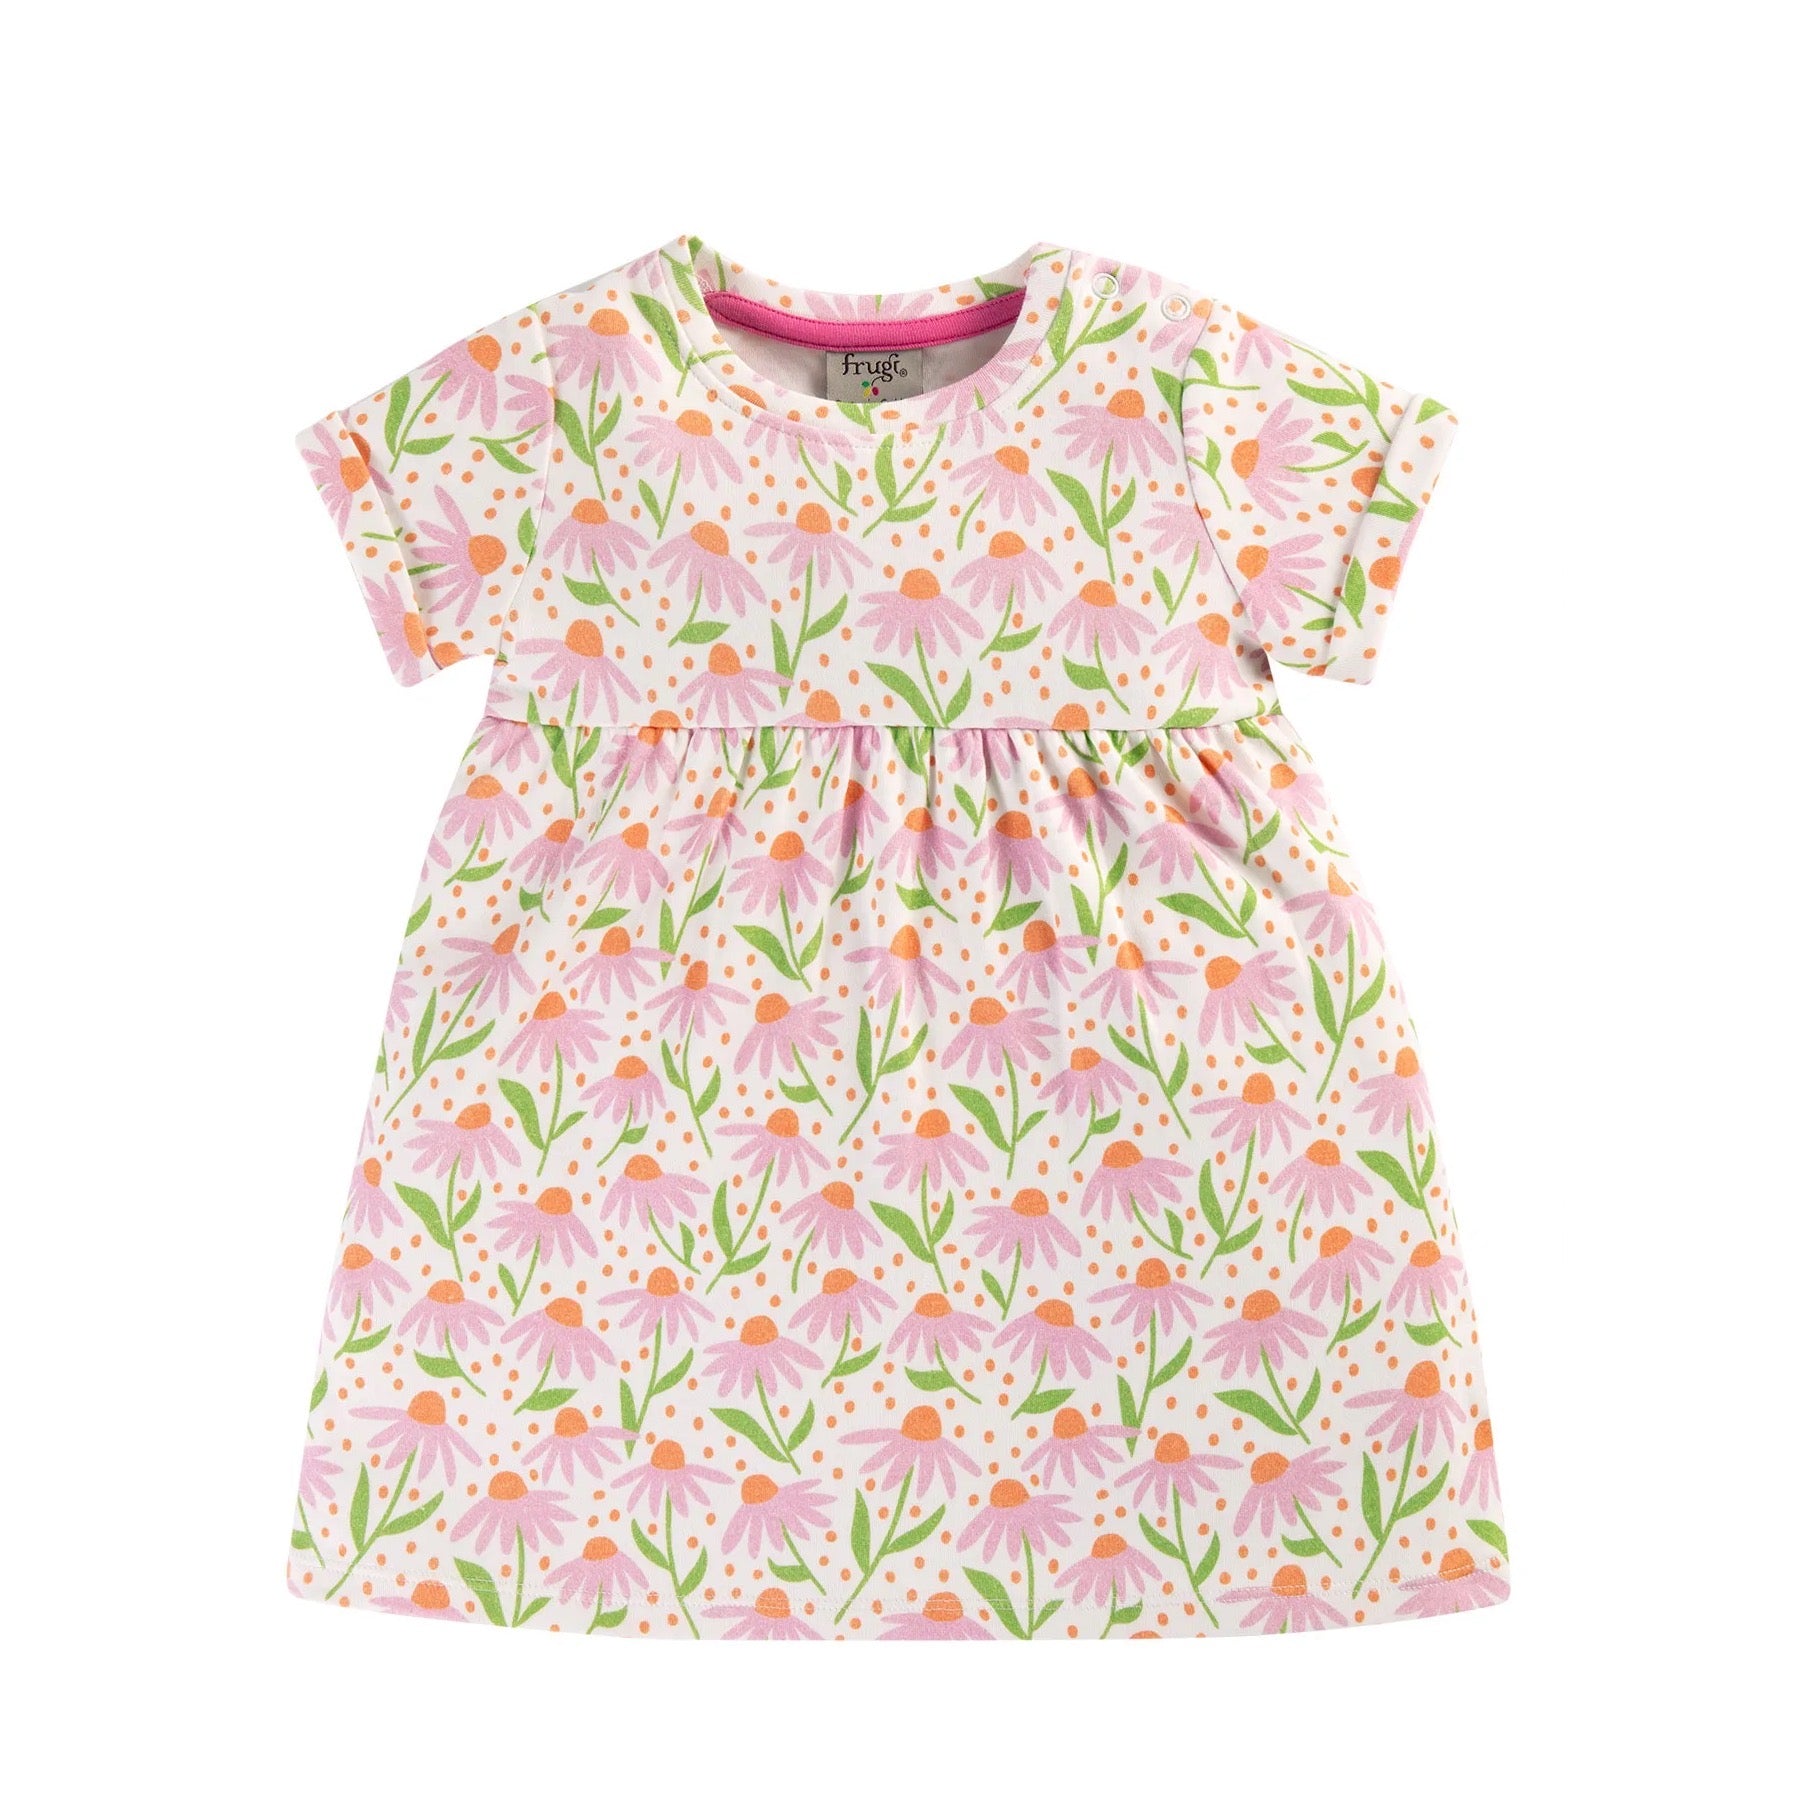 Frugi Taille Dress Om9co White Echinacea Clothing 0-3M / Pink,3-6M / Pink,6-9M / Pink,9-12M / Pink,12-18M / Pink,18-24M / Pink,2-3YRS / Pink,3-4YRS / Pink